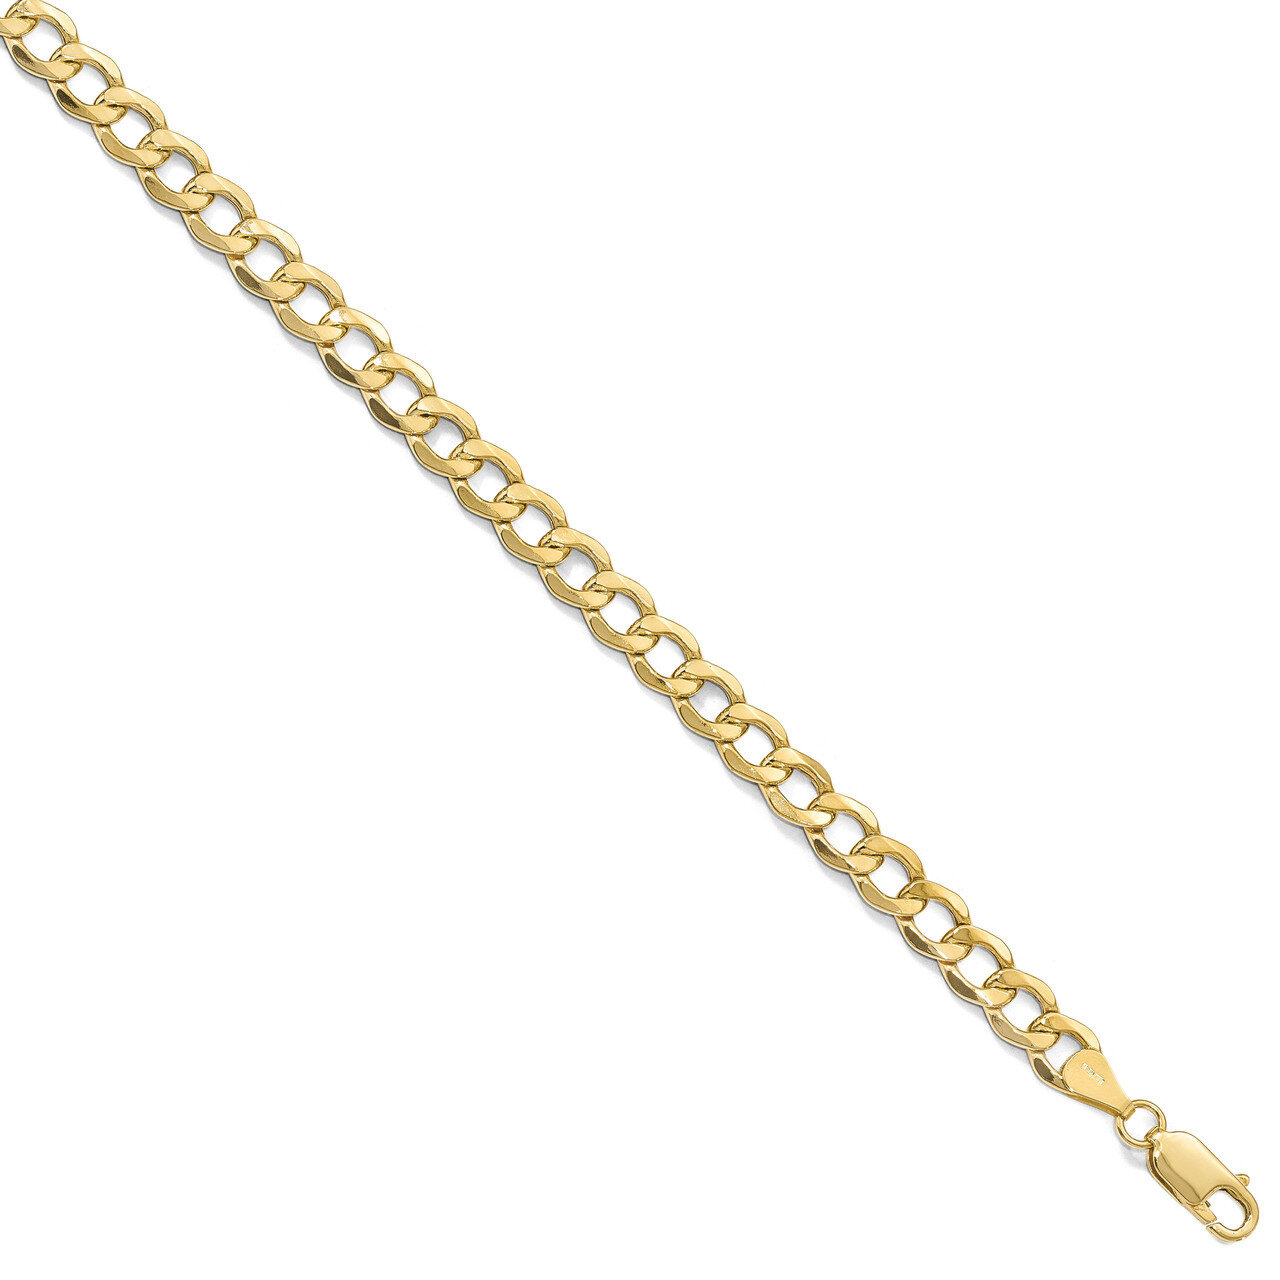 6.5mm Semi-Solid Curb Link Chain 24 Inch 10k Gold HB-8242-24